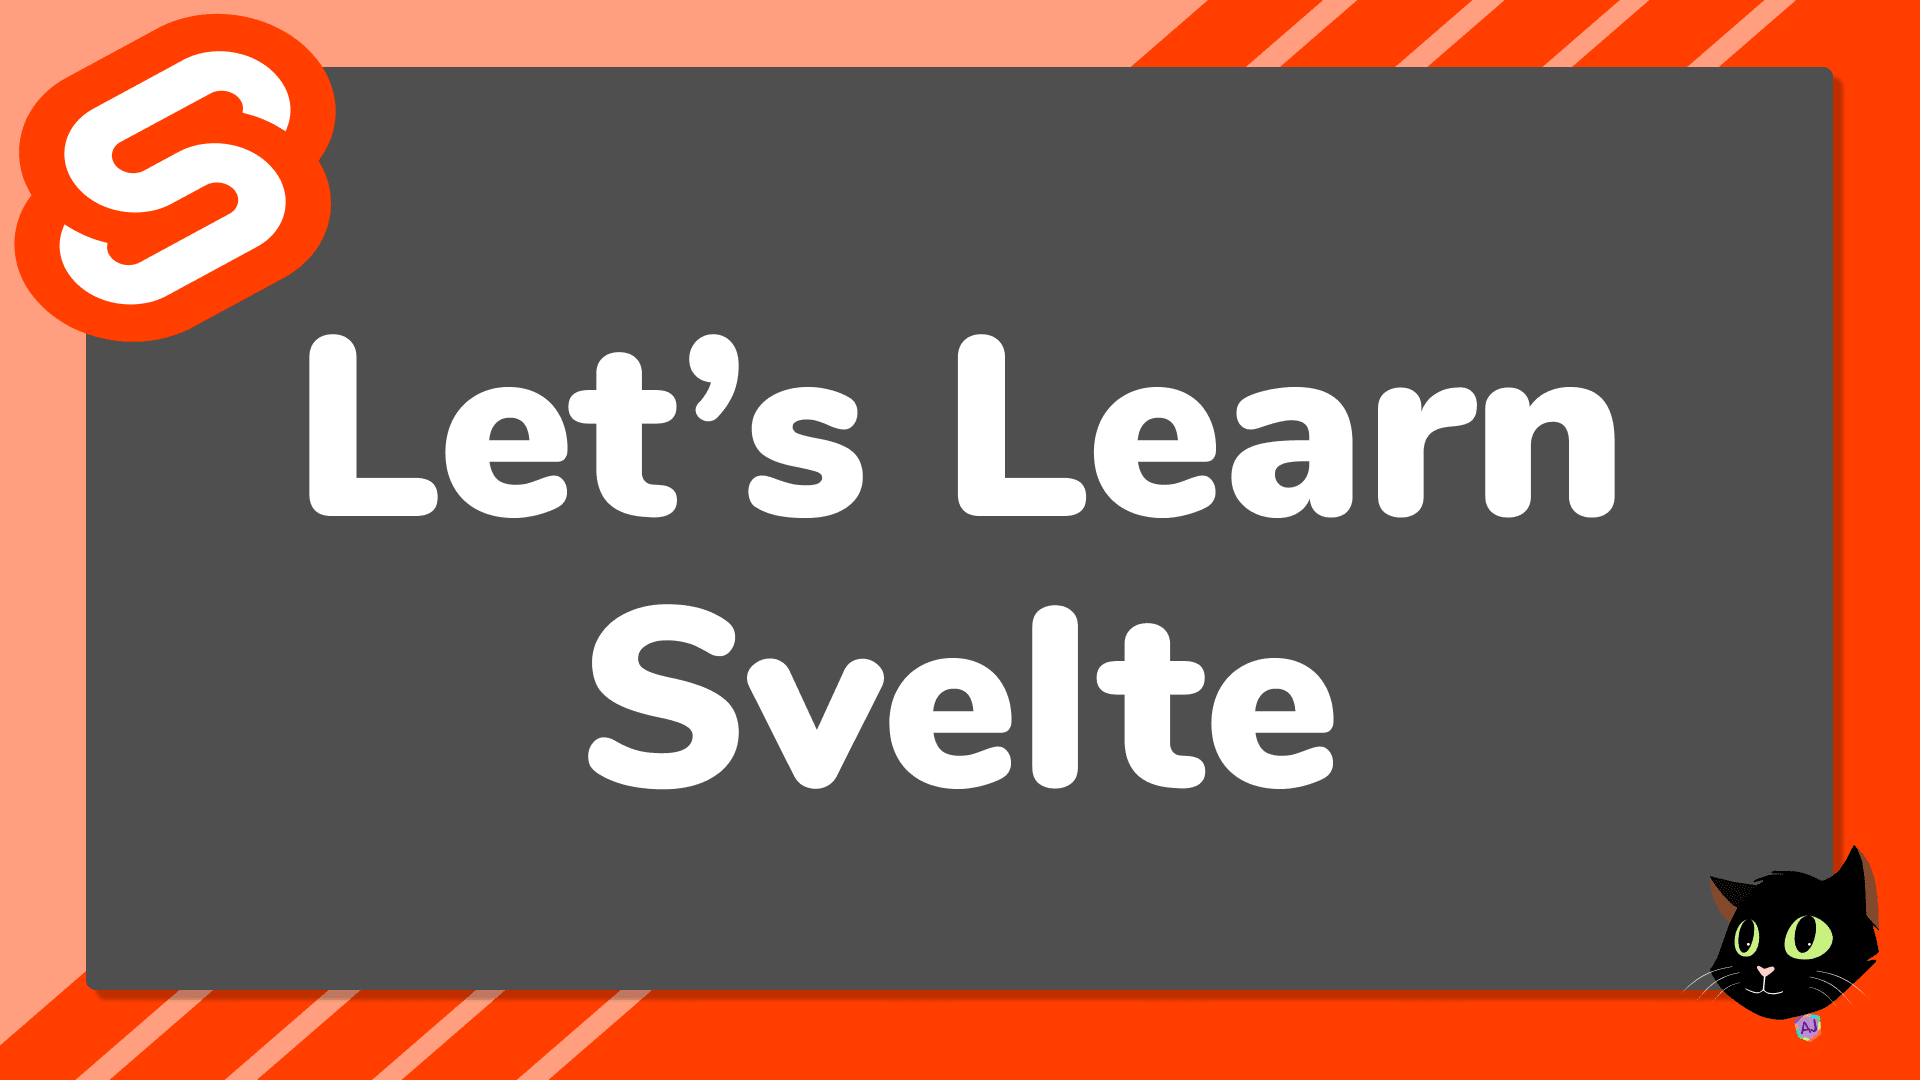 Let's Learn Svelte